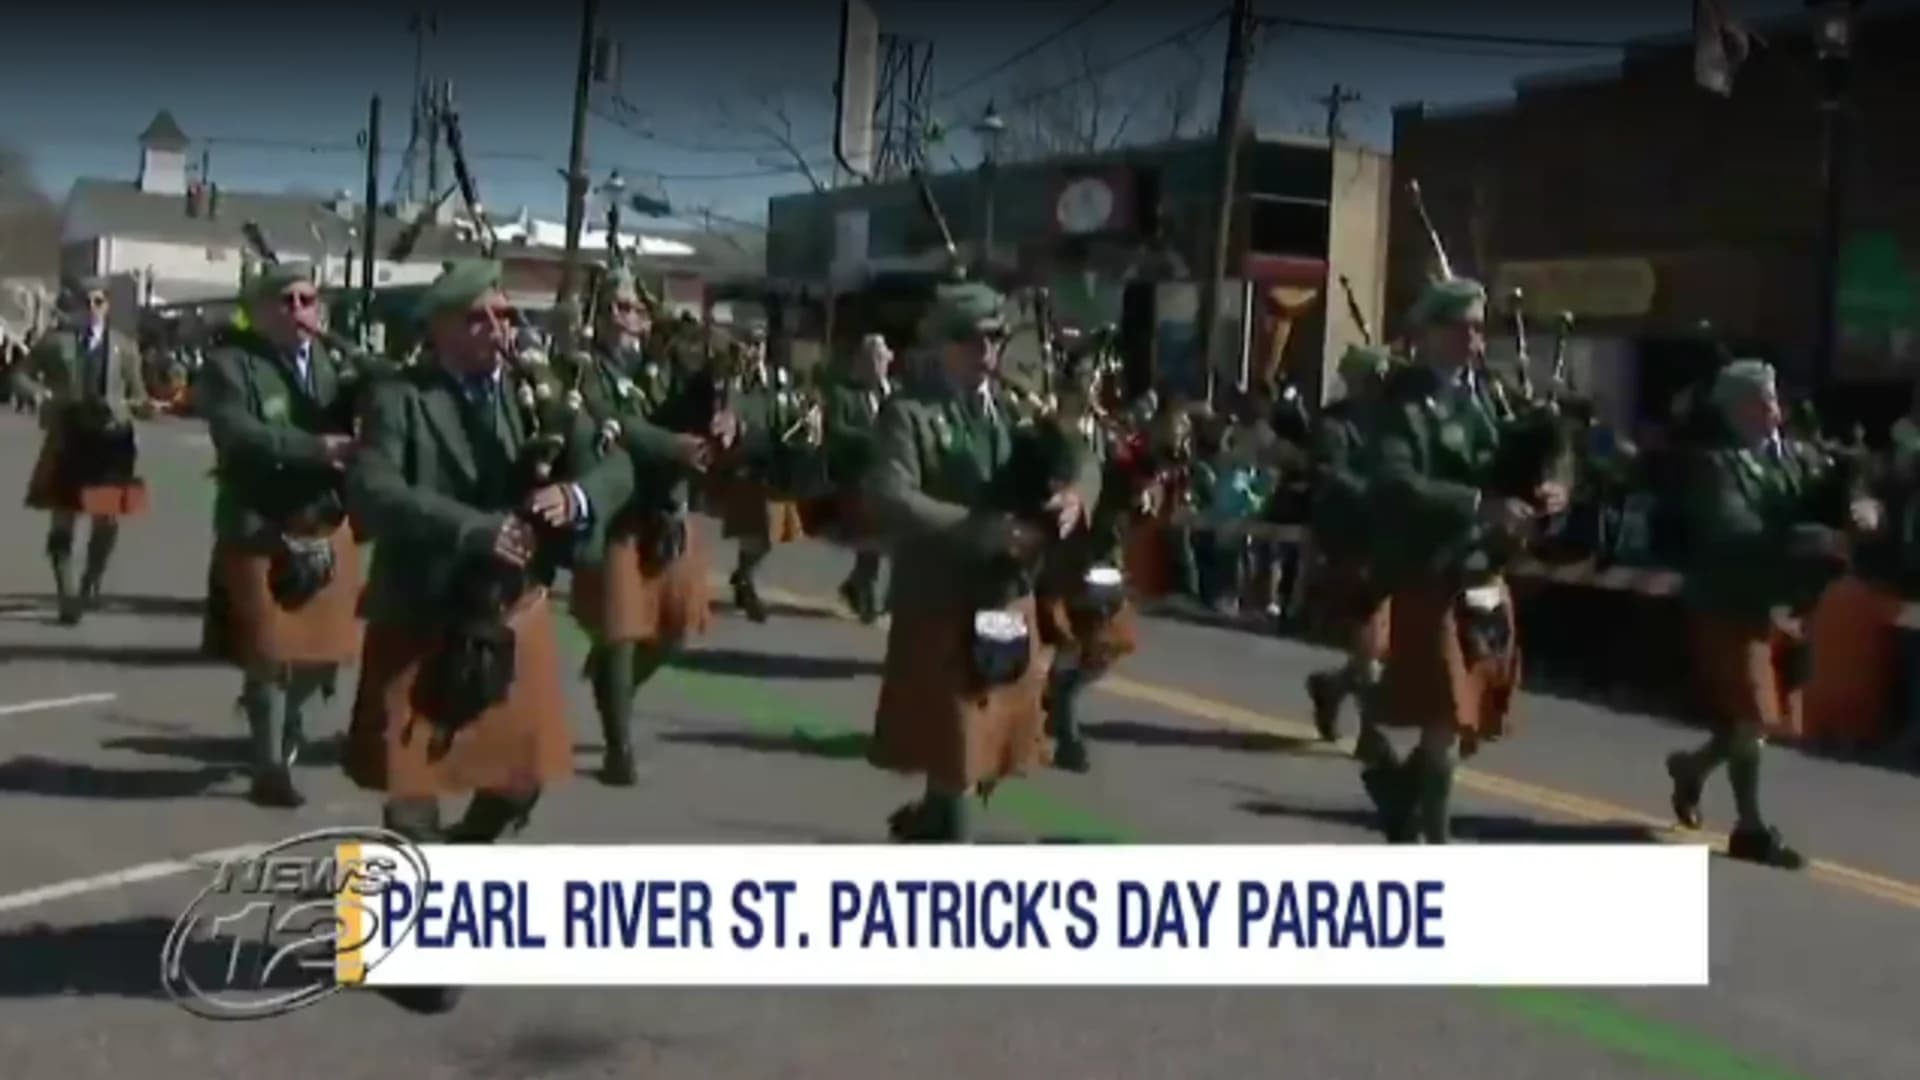 Thousands celebrate St. Patrick’s Day in Pearl River